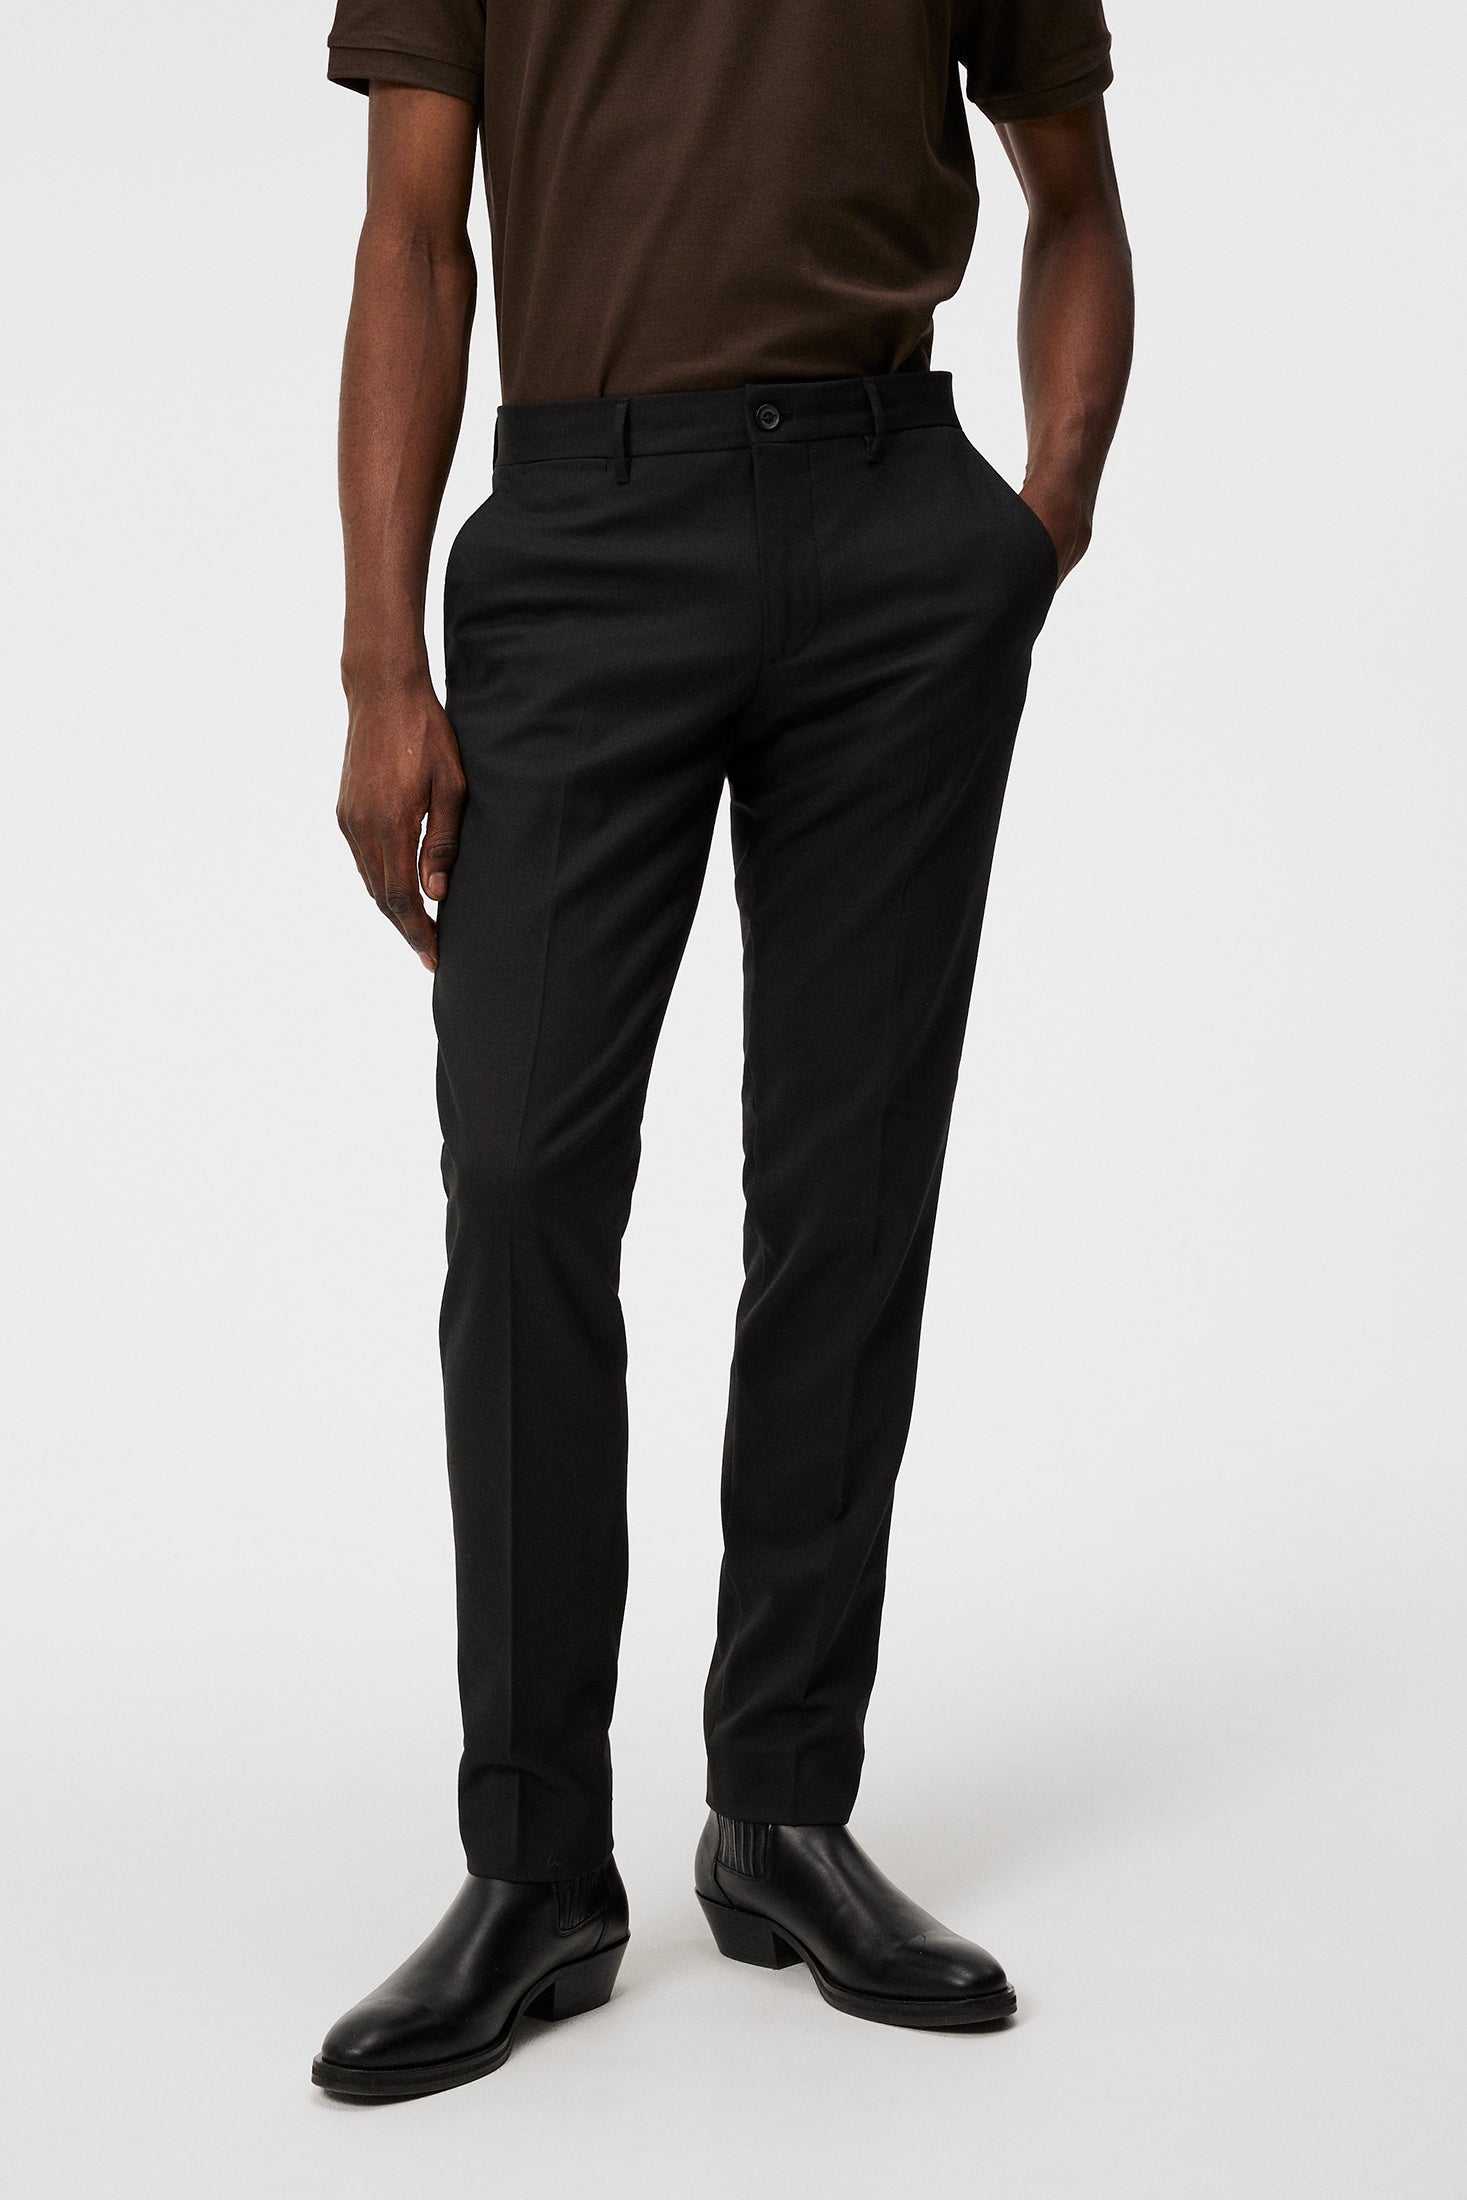 J.Lindeberg Axil Fleece Twill Pant Thermo Pants in black buy online - Golf  House